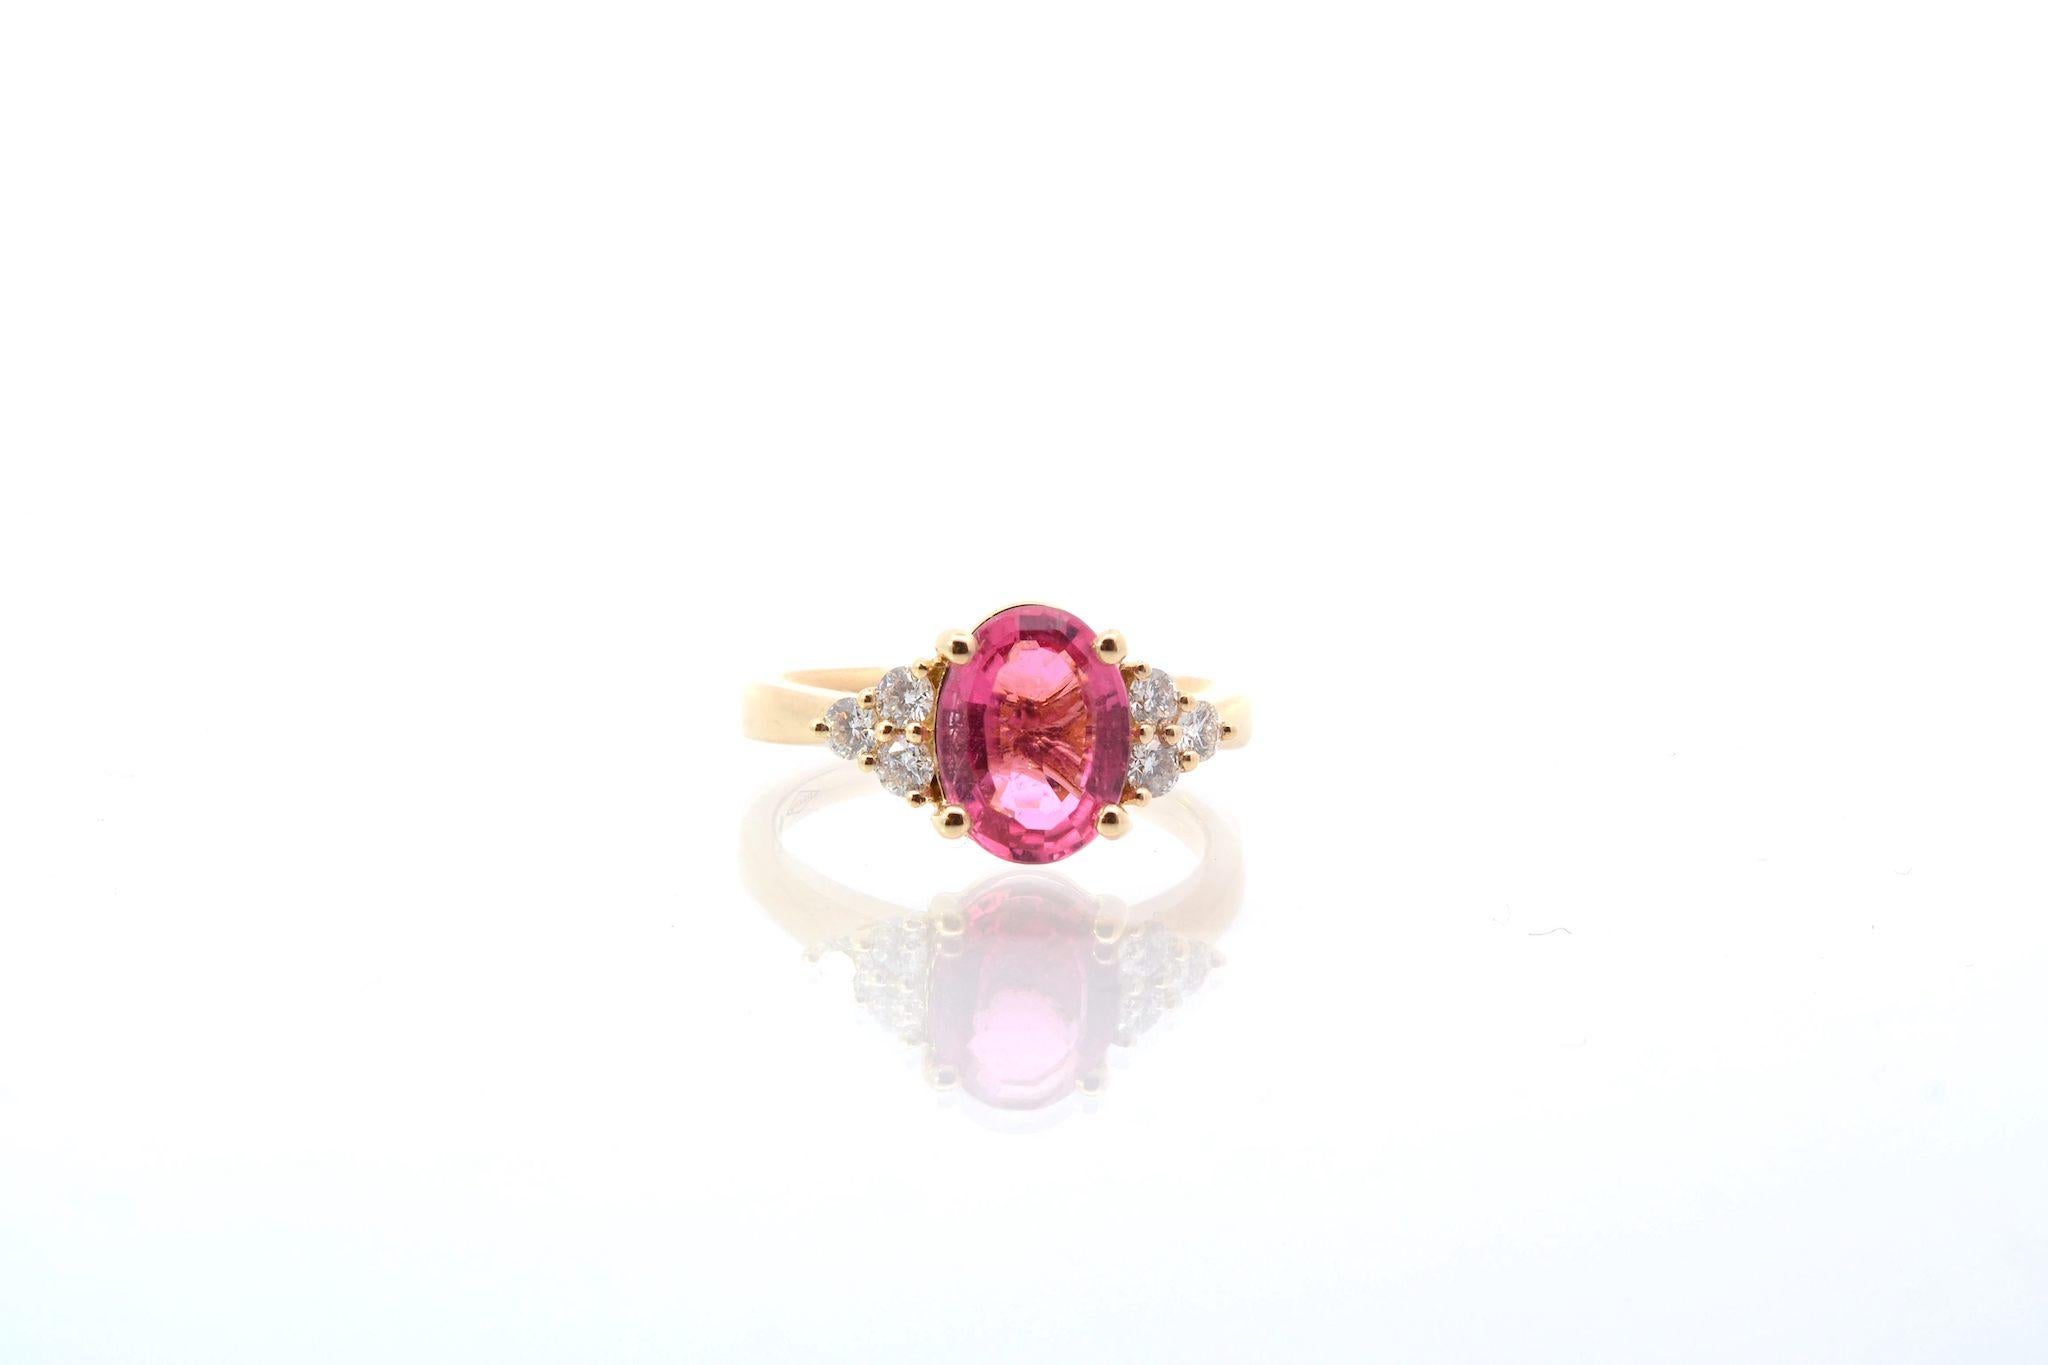 Stones: Tourmaline 1.86cts, 6 diamonds: 0.31ct
Material: 18k yellow gold
Dimensions: 1.6cm x 1cm
Weight: 5.2g
Period: Recent
Size: 53 (free sizing)
Certificate
Ref. : 25427 25450